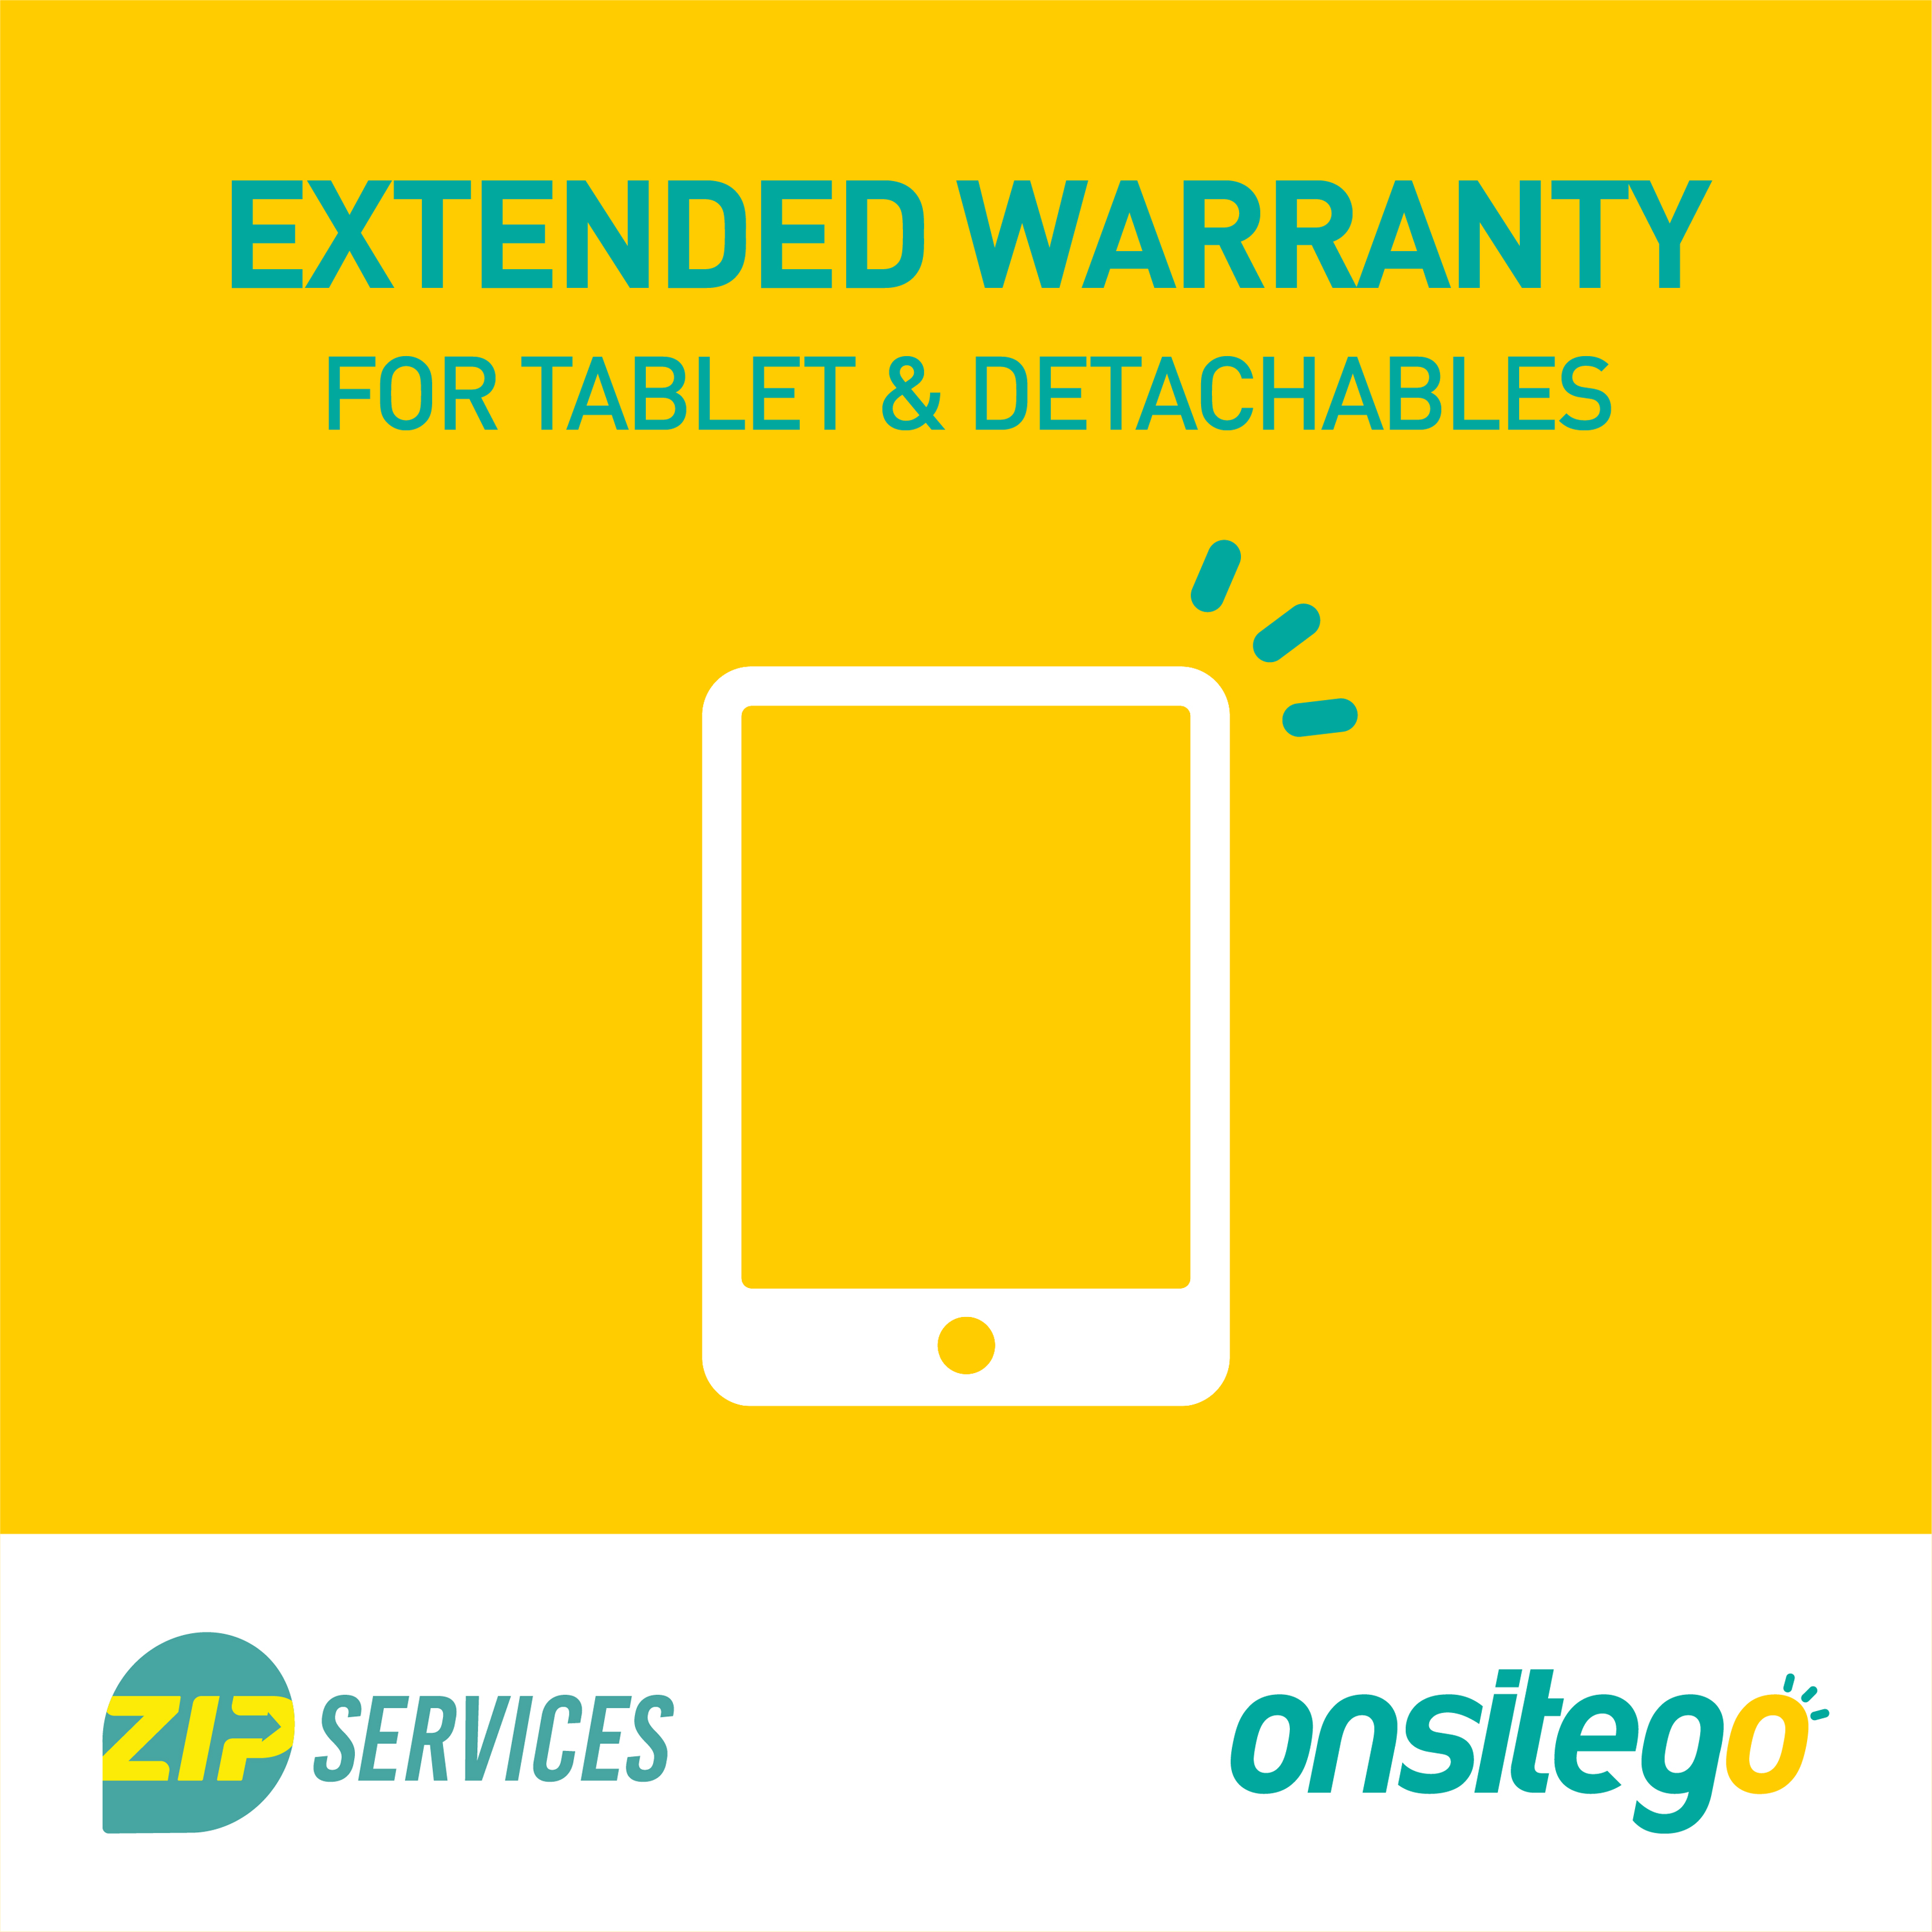 Onsitego 3 Months Extended Warranty for Tablets Rs.50001 - Rs.60000_1